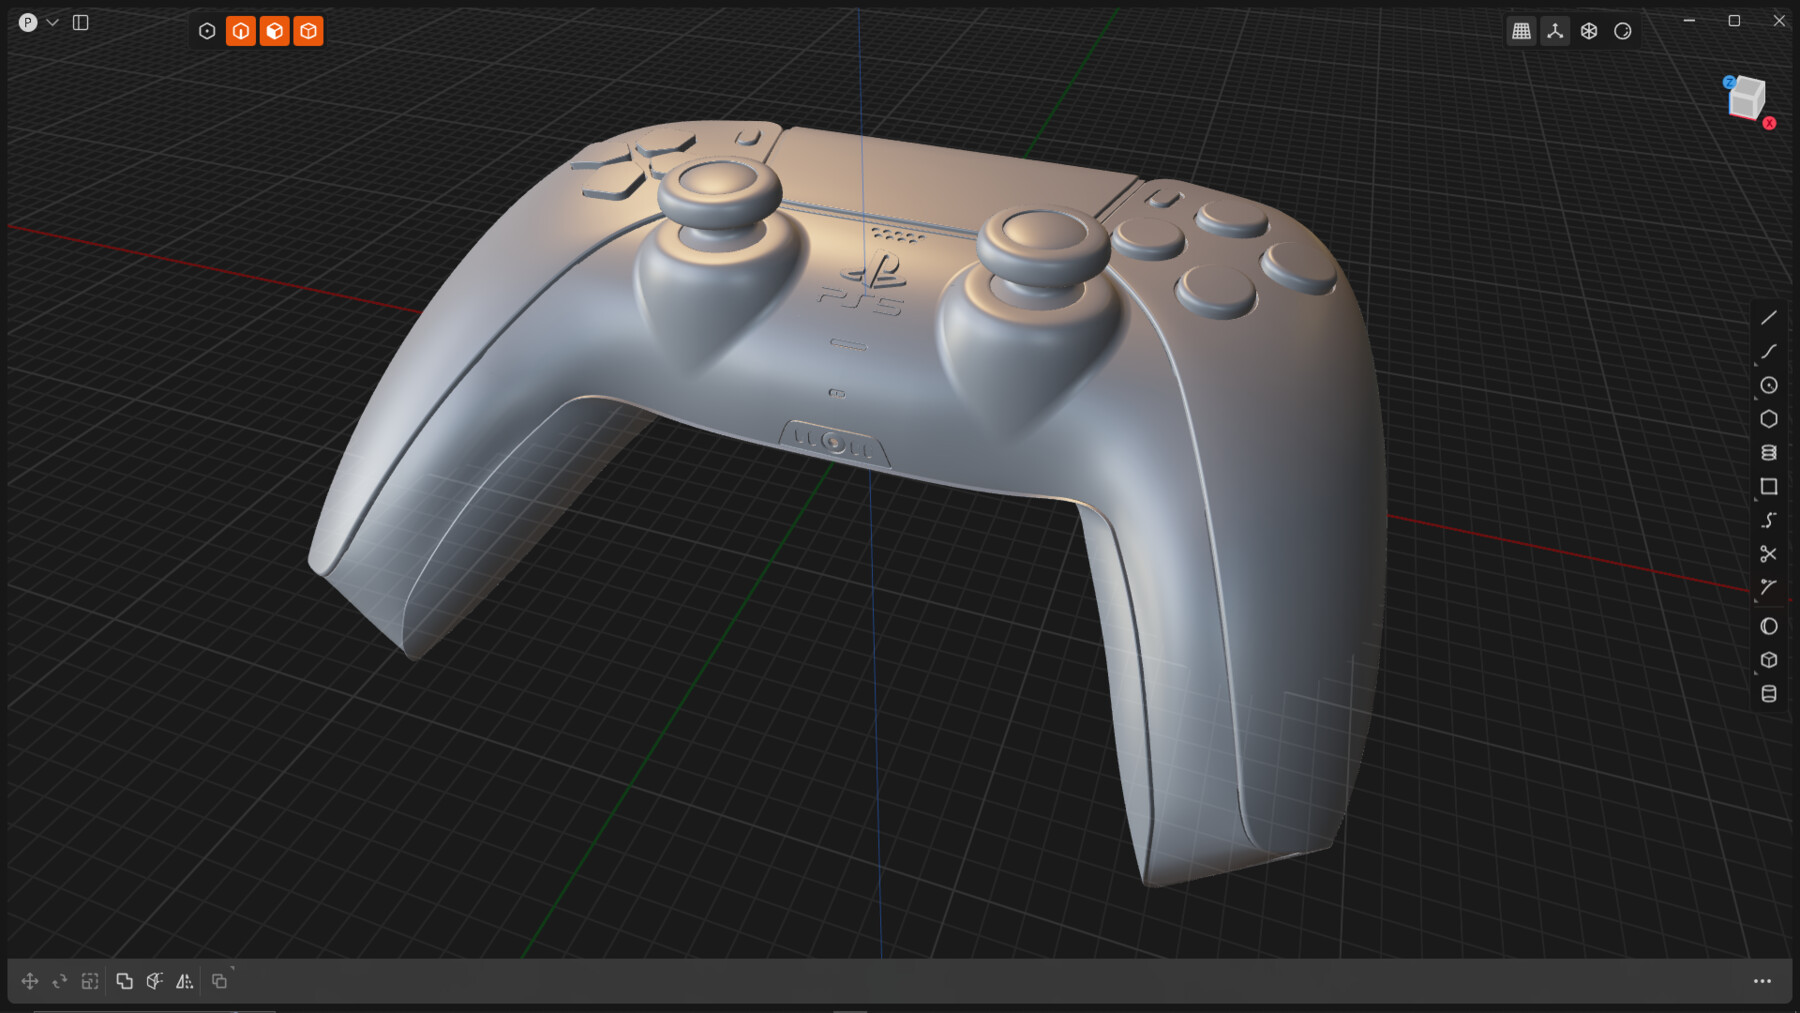 ArtStation - PS5 Controller from zero to hero, never seen on Plasticity 3D  1.4.13 I guarantee you!!